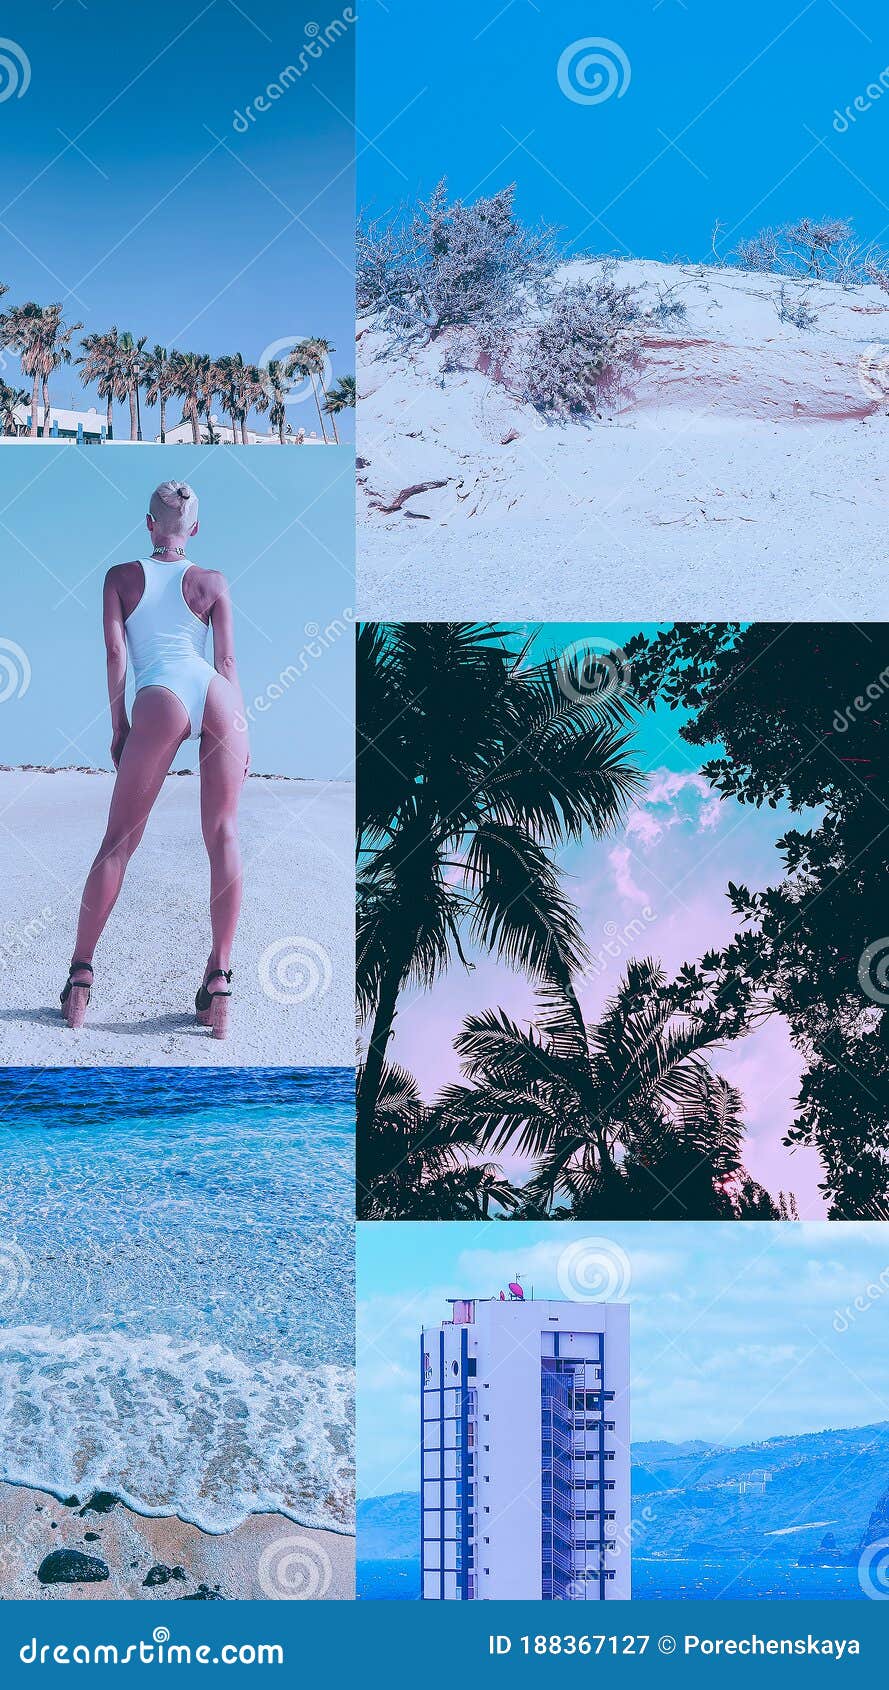 Aesthetic Fashion Moodboard Ocean Beach Blue Summertime Stock Image Image Of Anniversary Summer 188367127